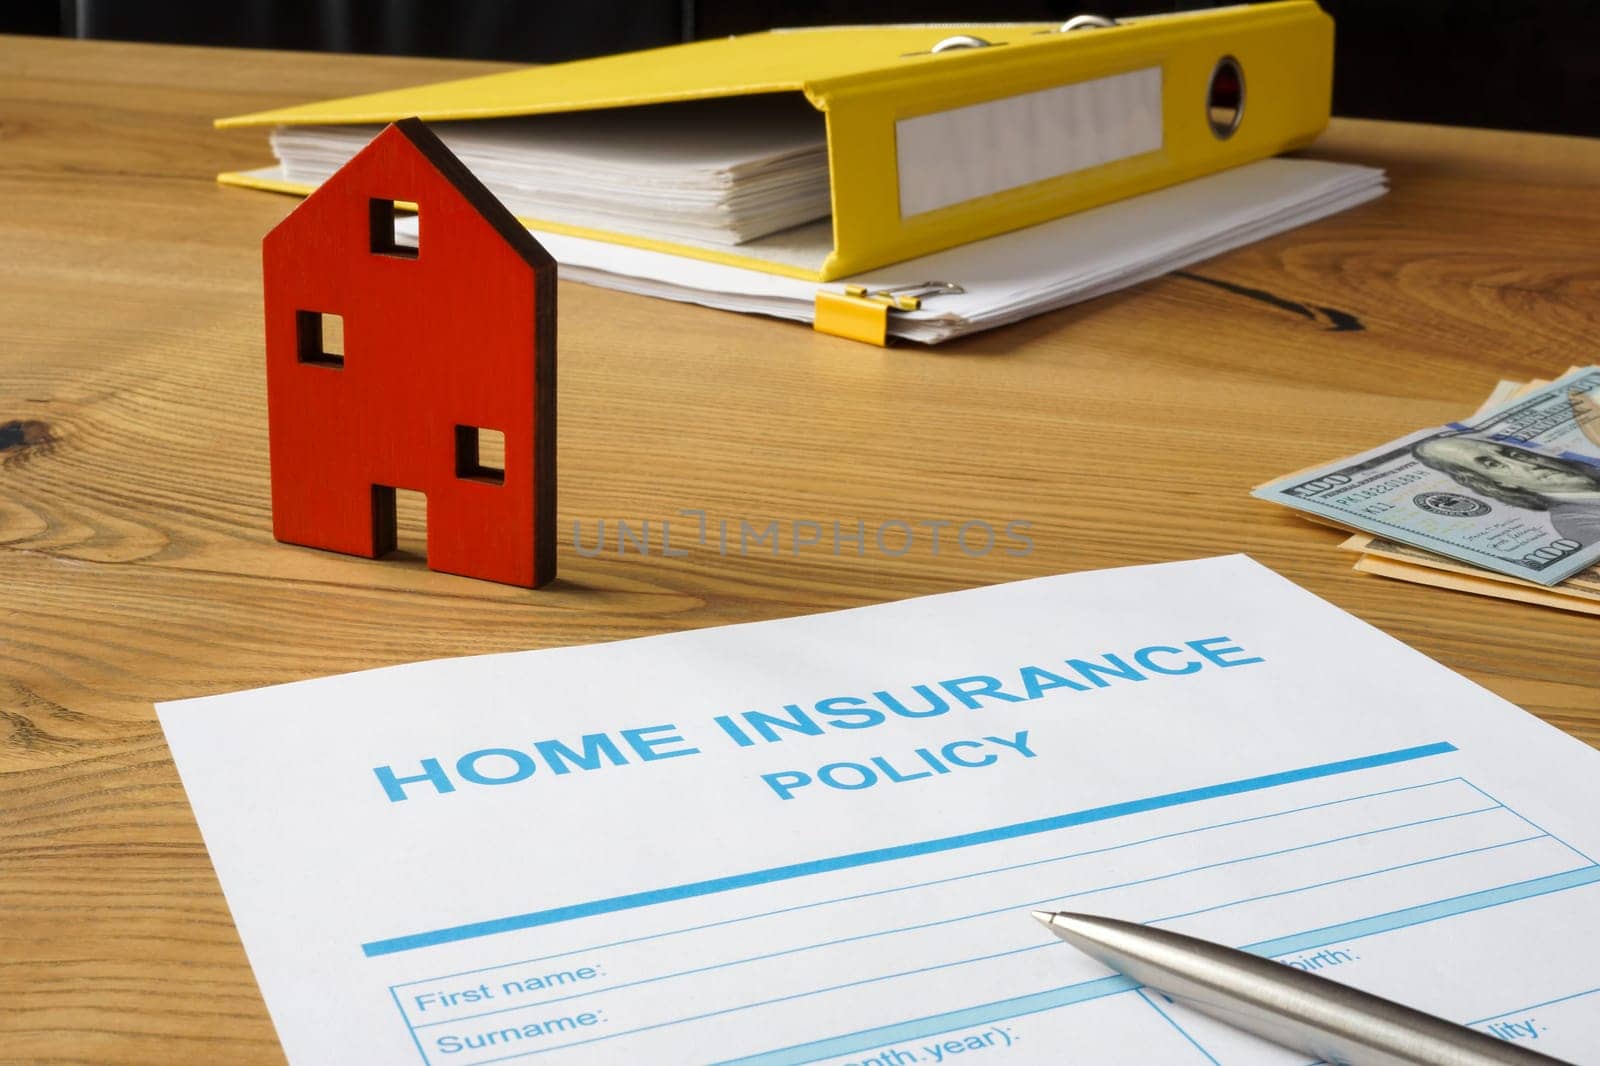 Home insurance policy form ready for signing.